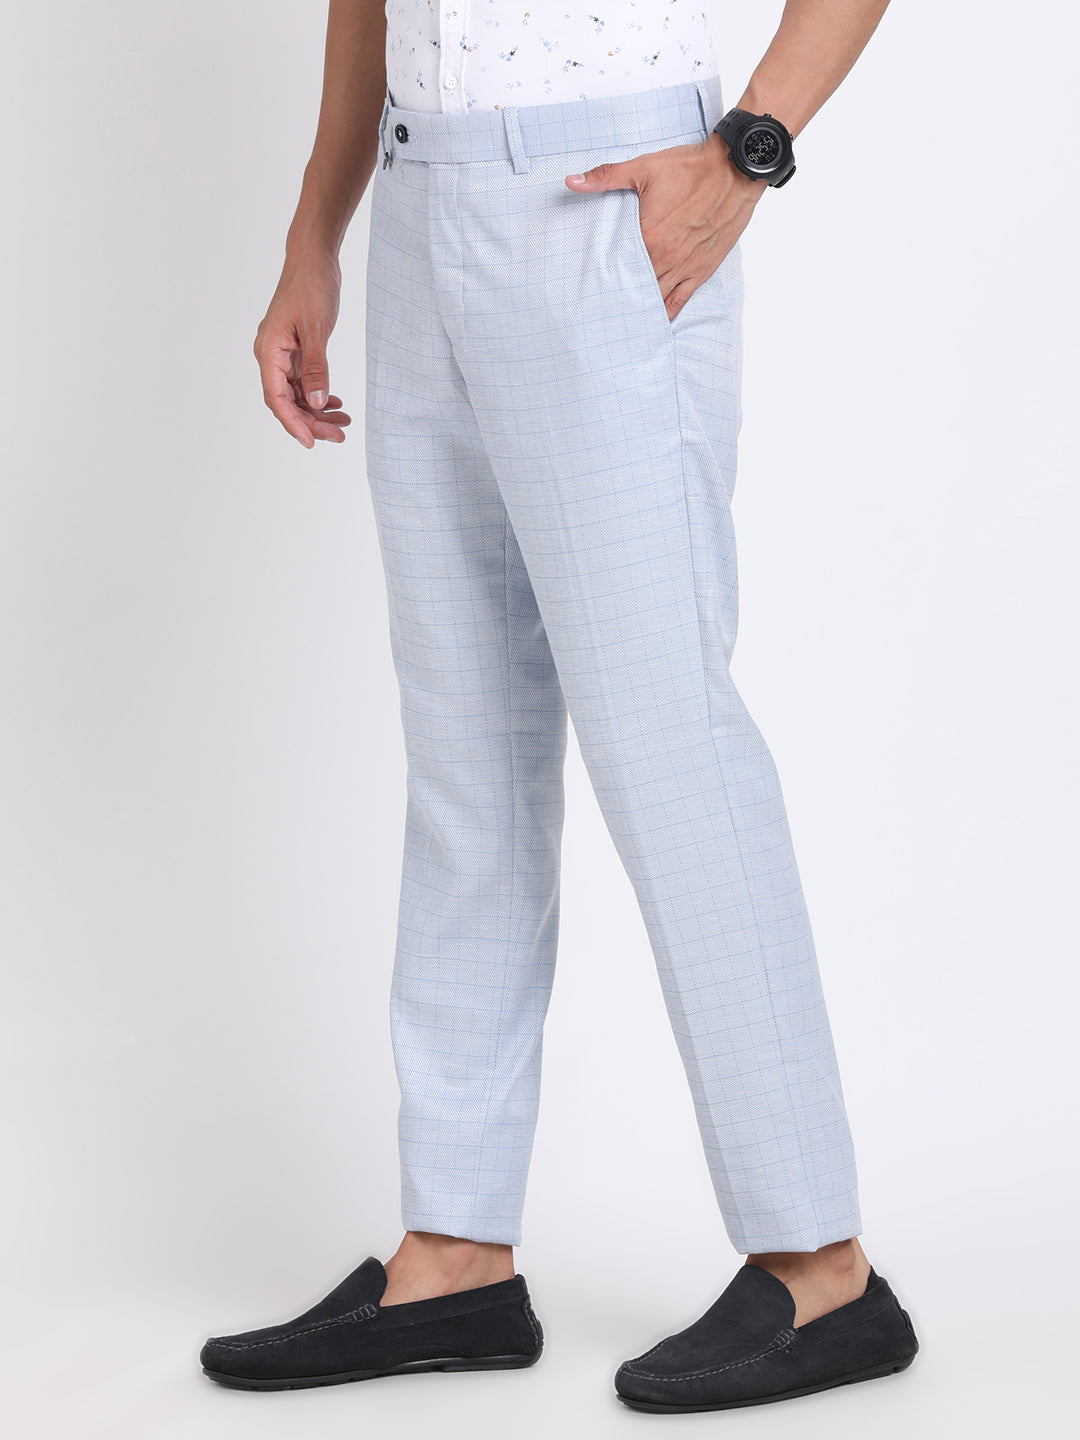 Poly Viscose Light Blue Checkered Ultra Slim Fit Flat Front Formal Trouser